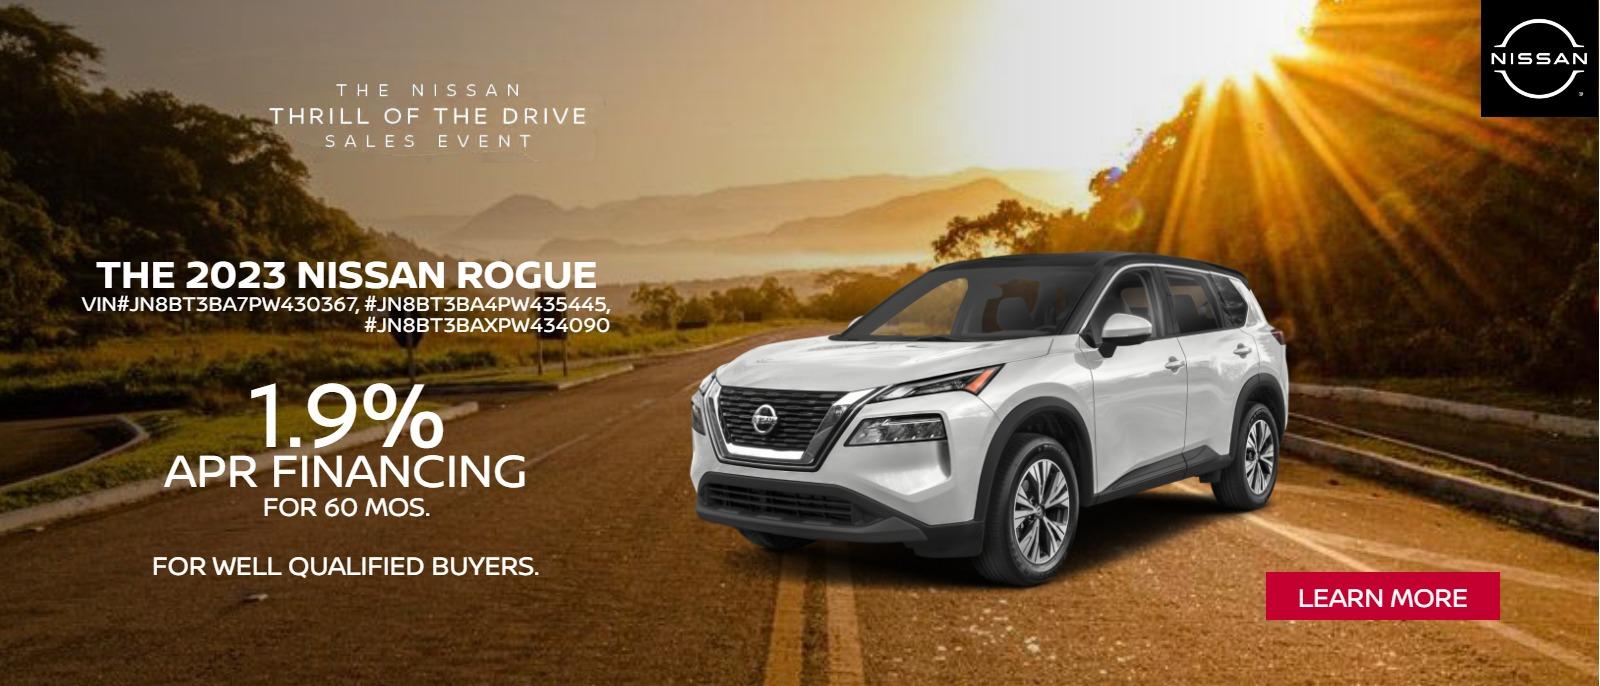 2023 NISSAN ROGUE
1.9%
APR FINANCING
FOR 60 MOS.